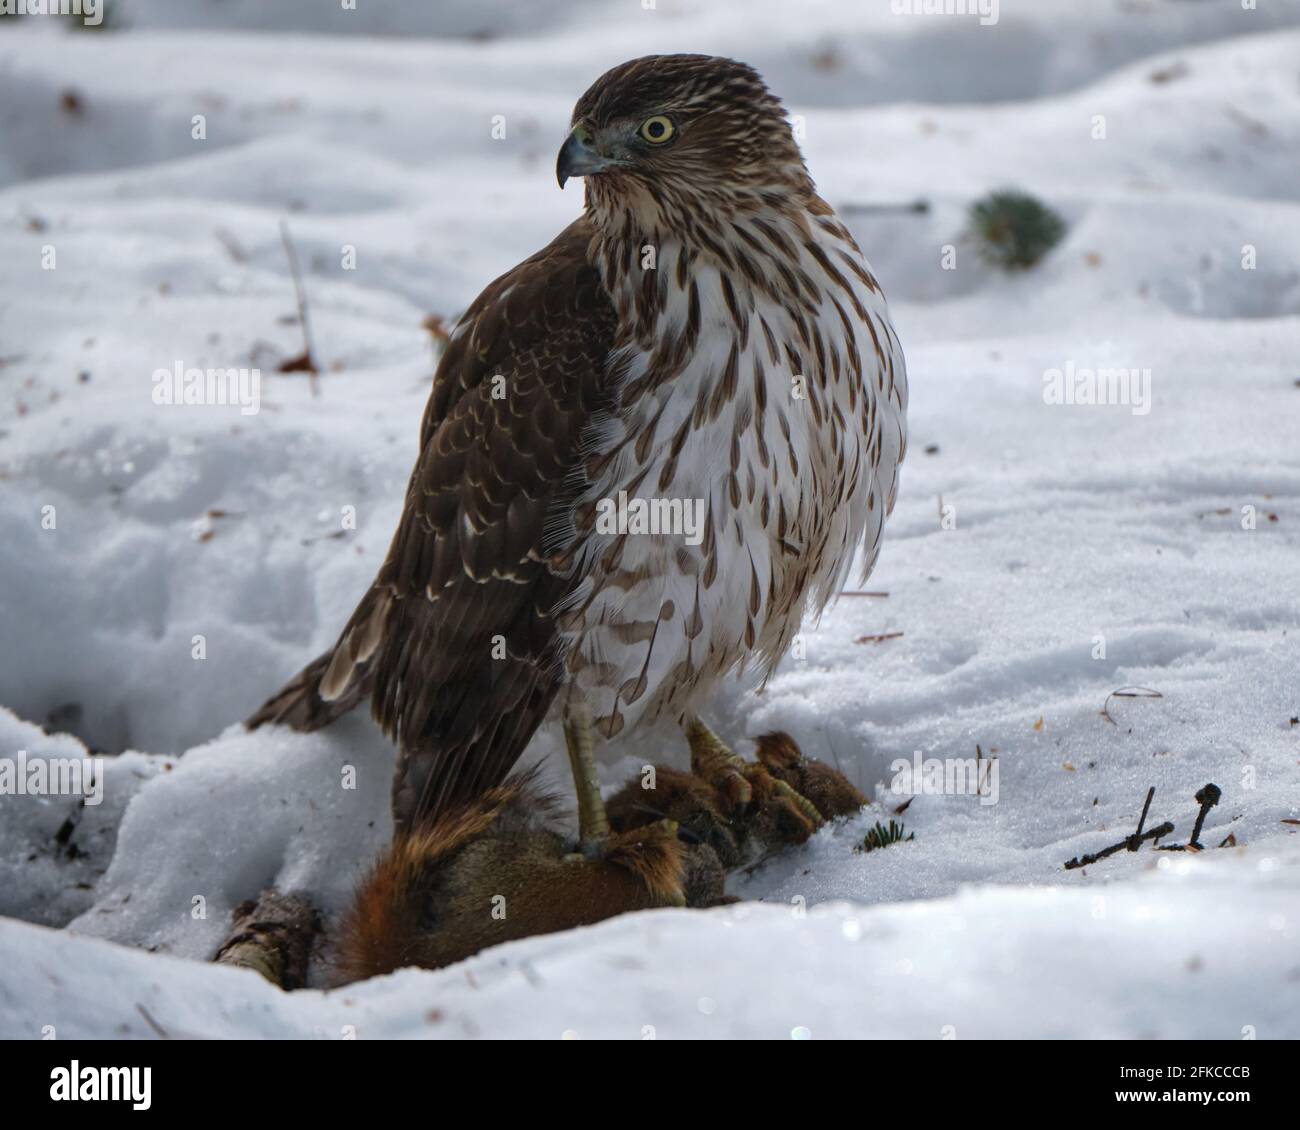 Cooper's Hawk, Accipiter cooperii, standing over red squirrel pray it just cought in snow Stock Photo